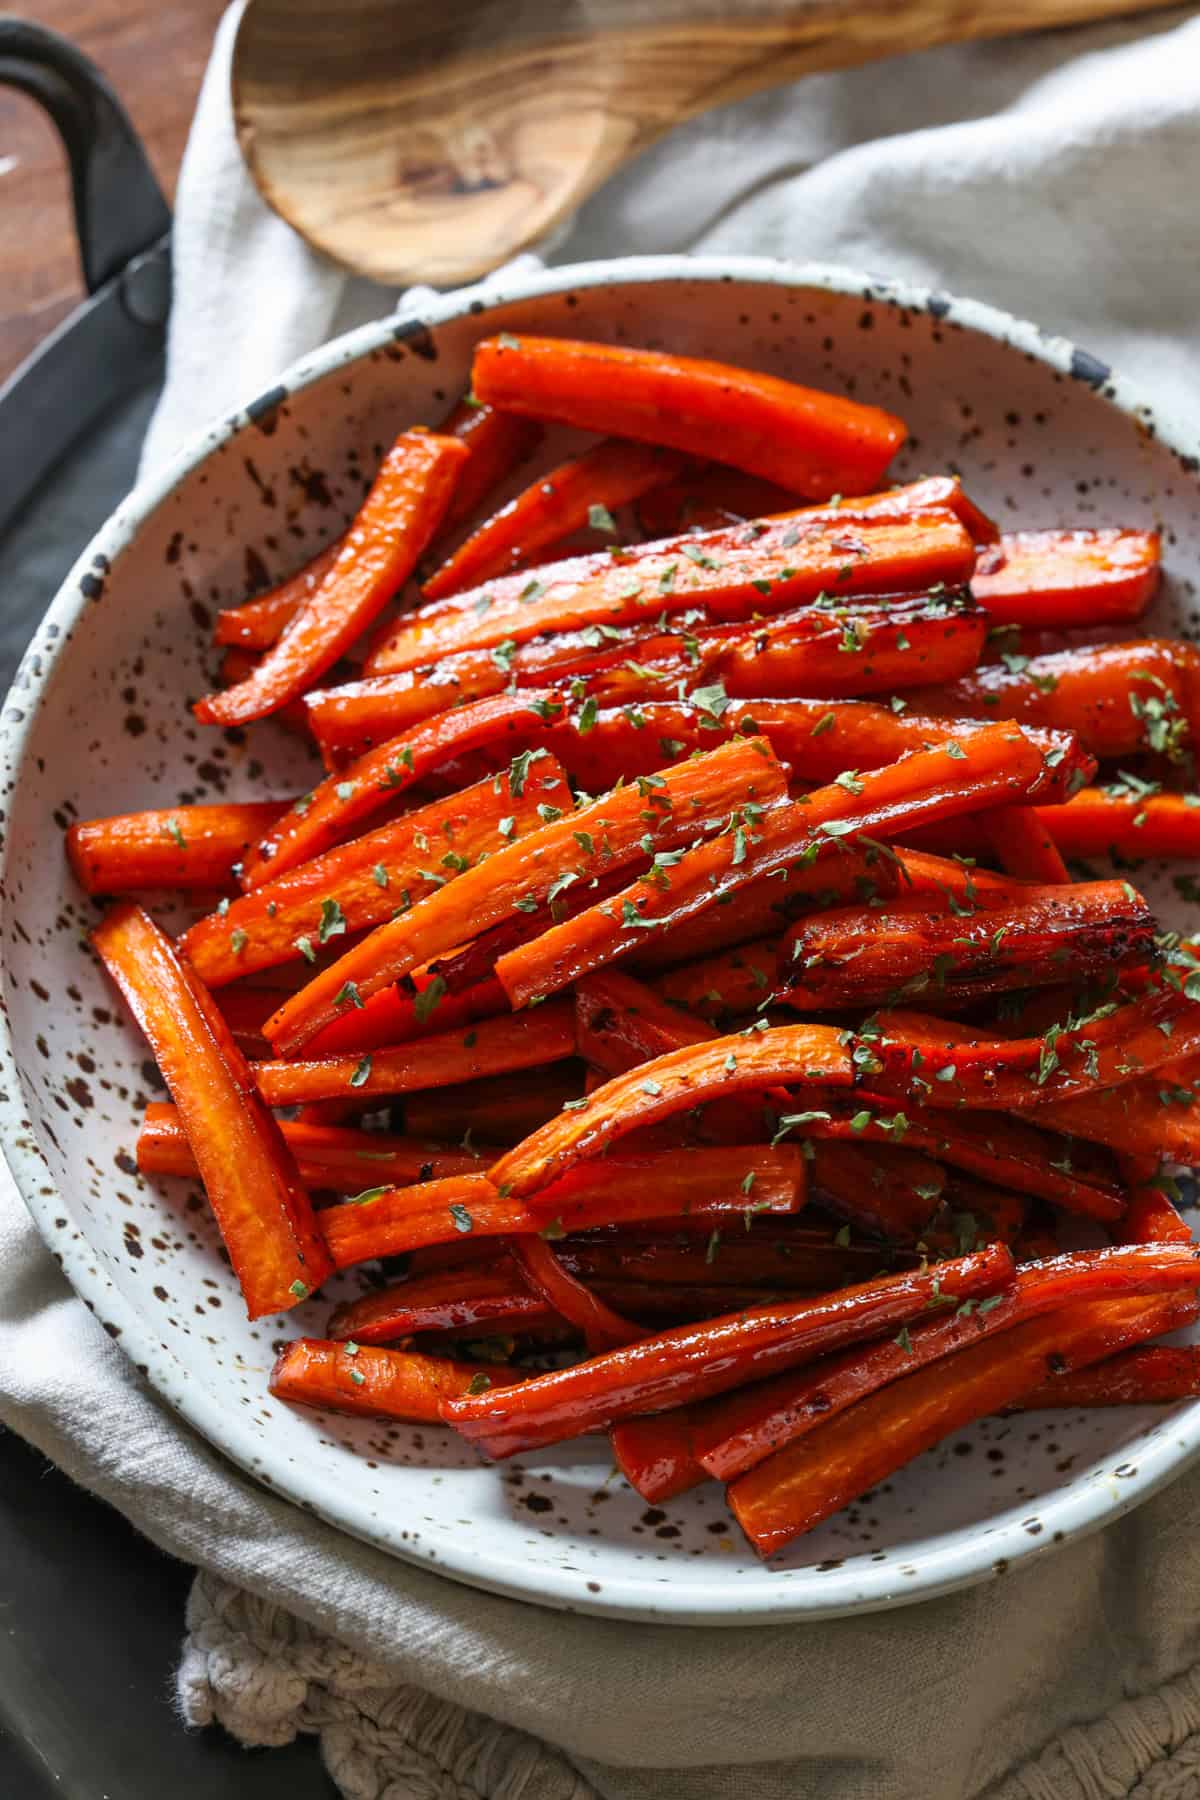 Roasted carrots in a bowl topped with parsley